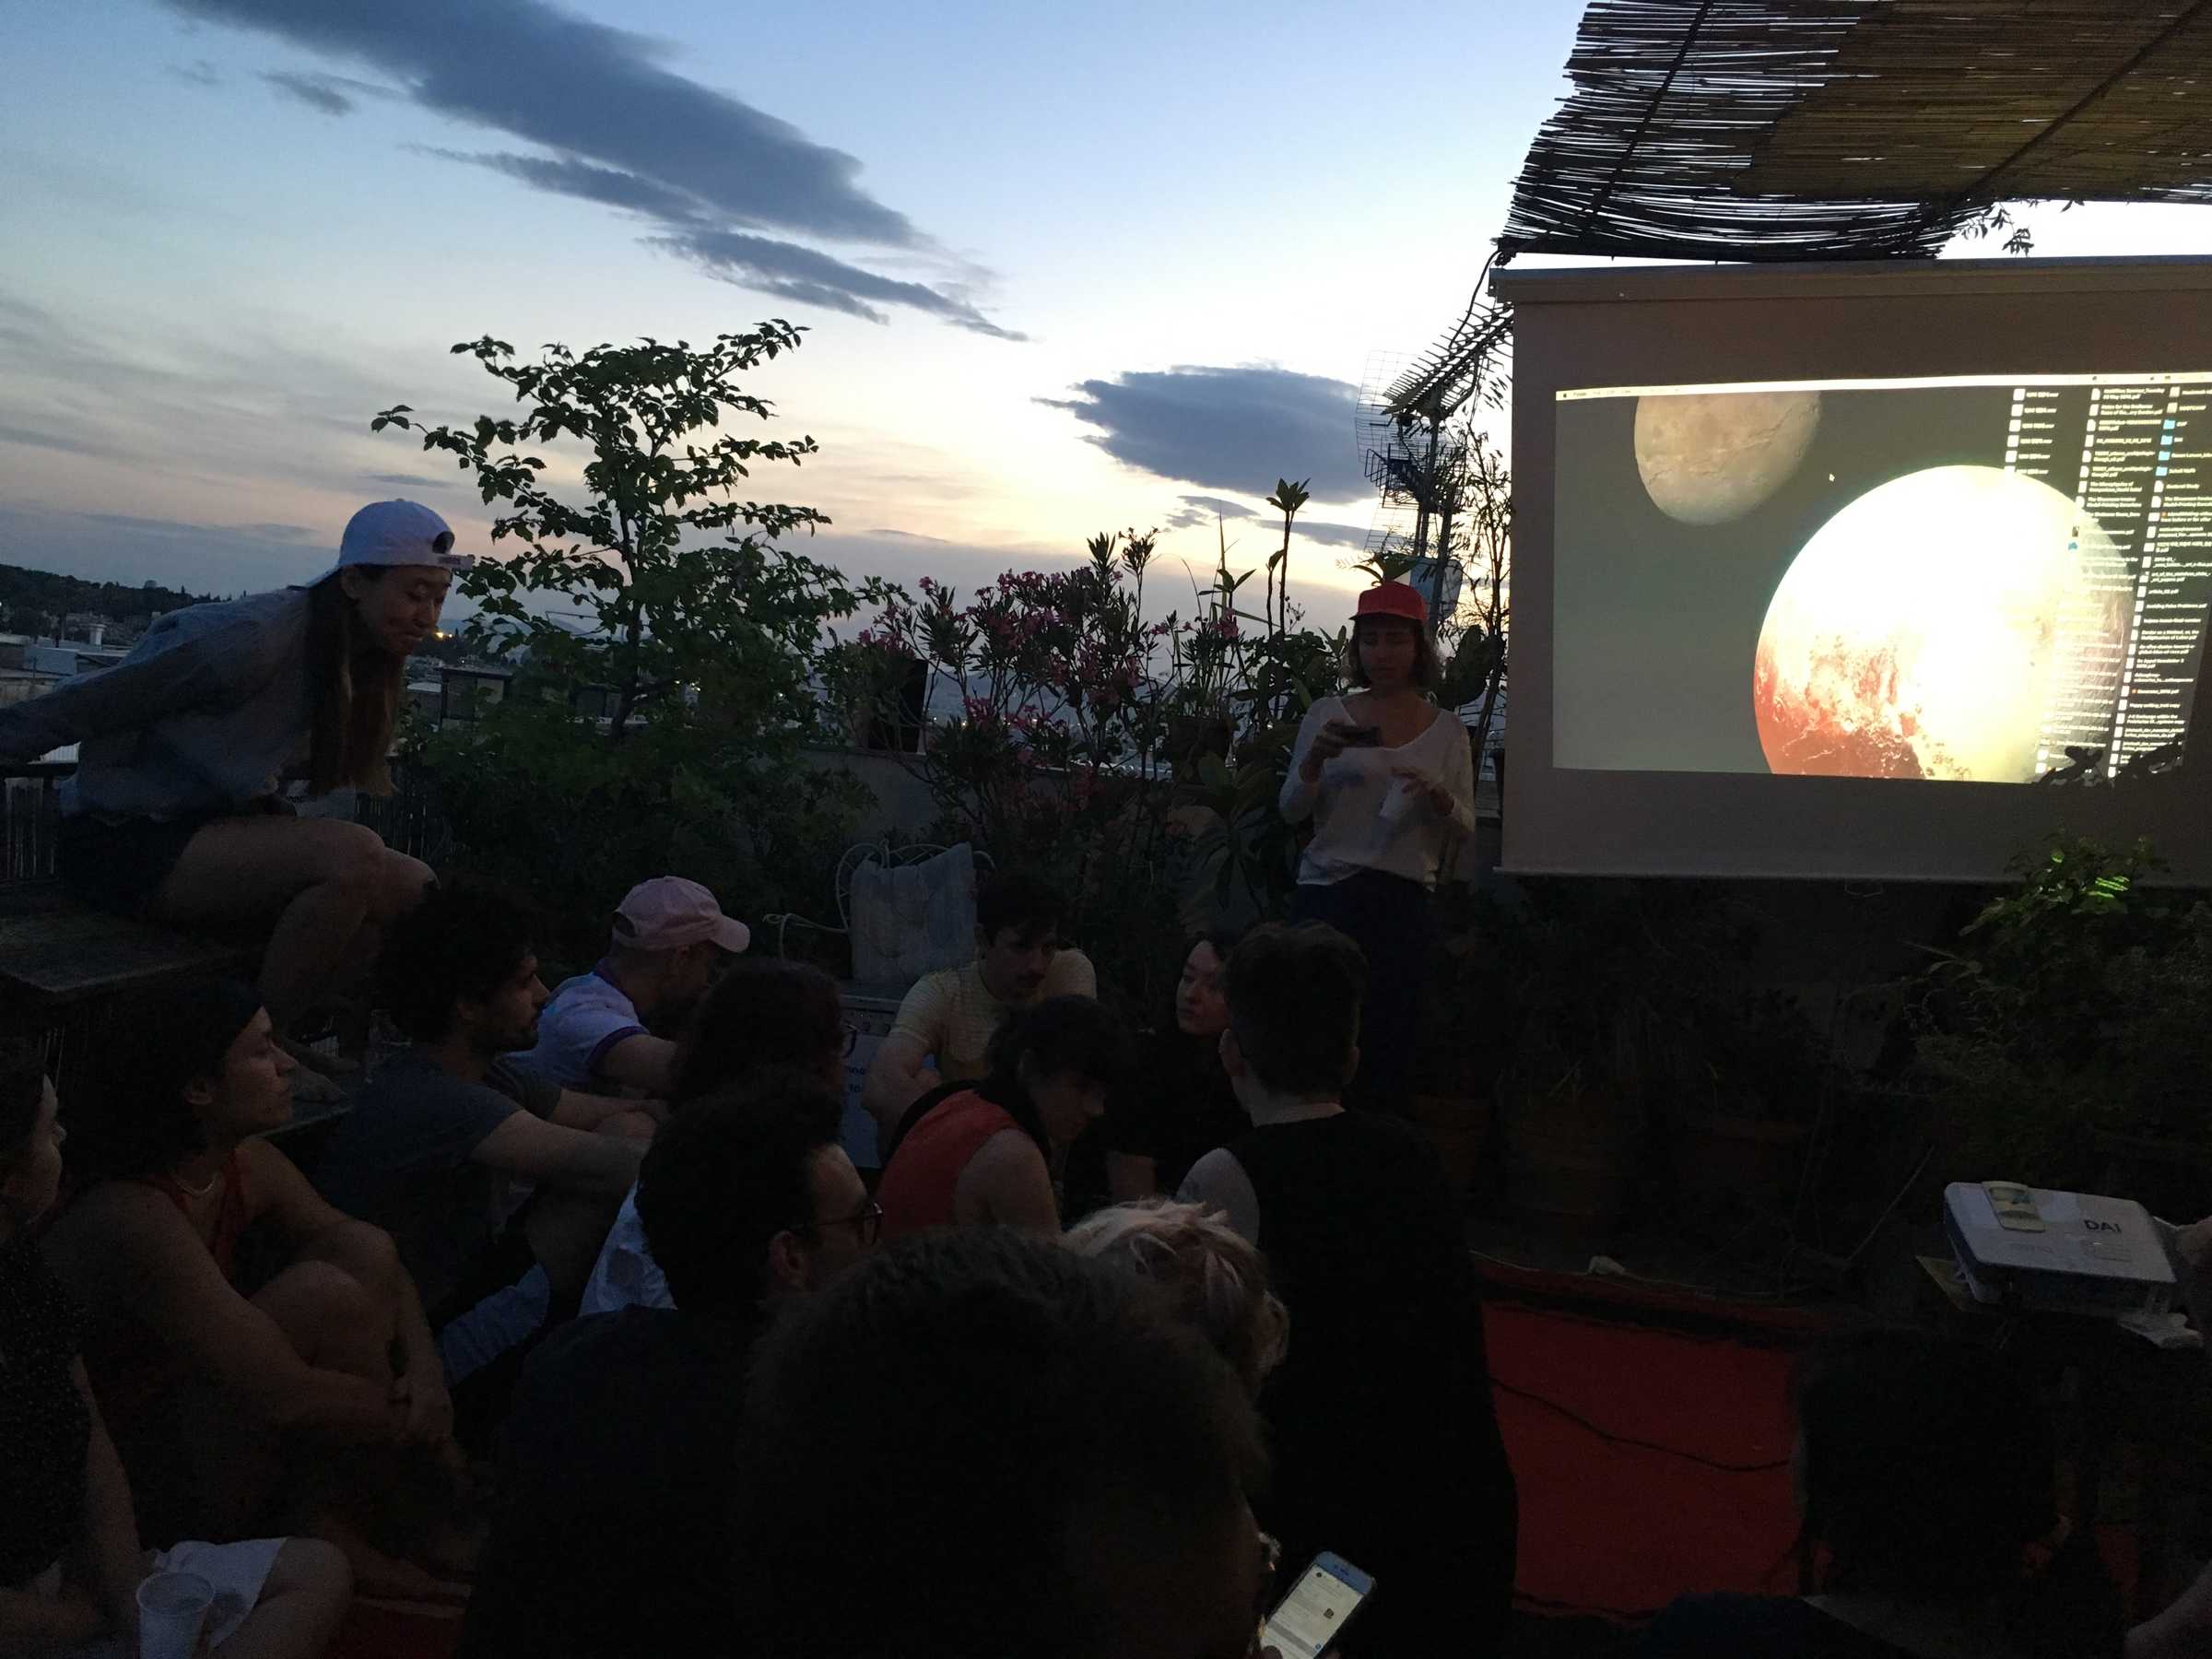 Athens, Exarcheia, : Film screening by DAI student Areumnari Ee during Rooftop Symposium - ISLANDTHINKING -  Hosted by DAI Student Yen Noh and Alexander Seferiades